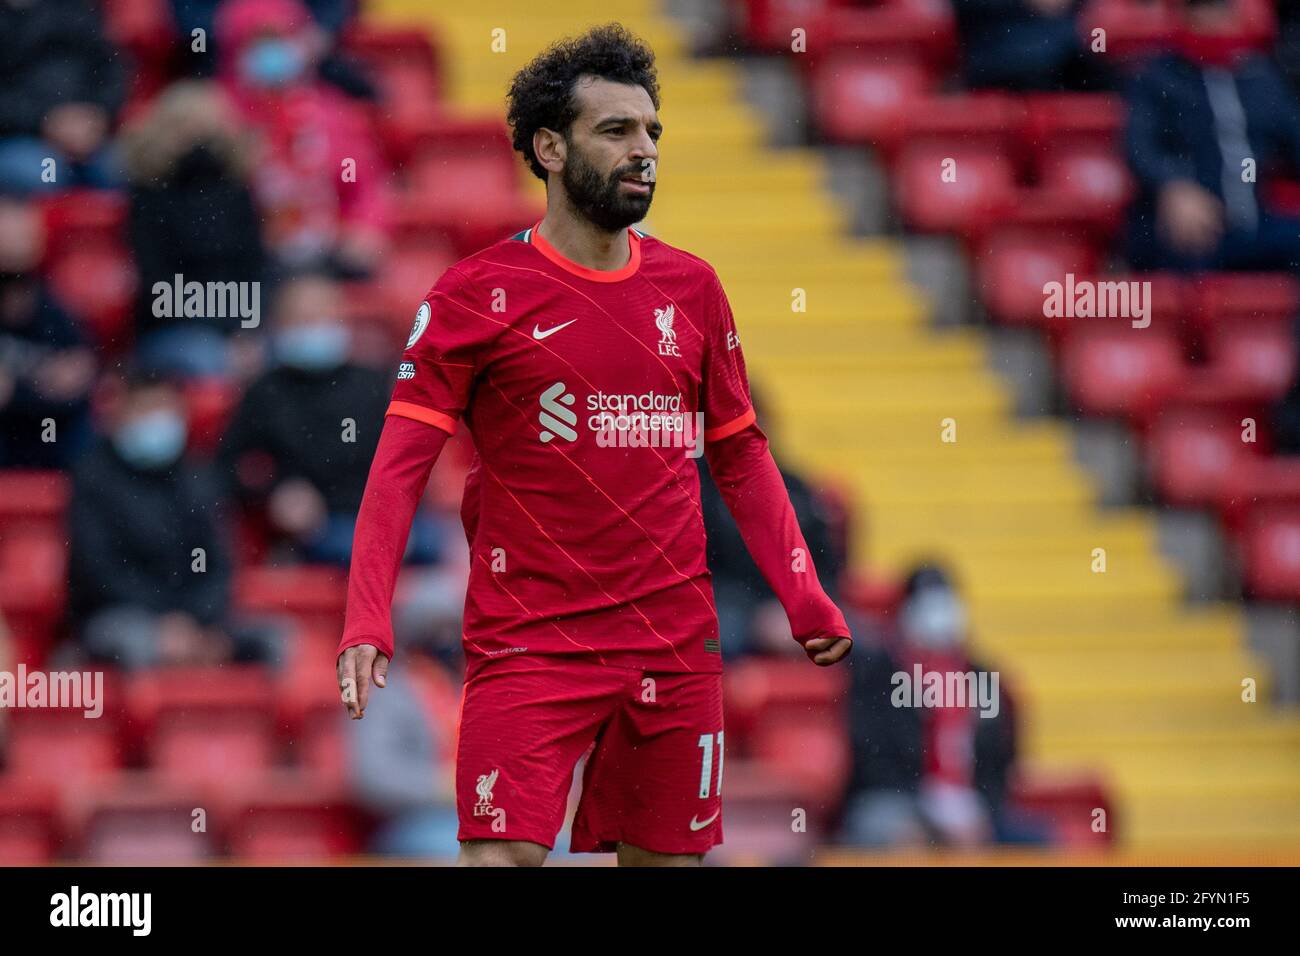 LIVERPOOL, ENGLAND - MAY 23: Mohamed Salah of Liverpool during Premier League match between Liverpool and Crystal Palace at Anfield on May 23, 2021 Stock Photo